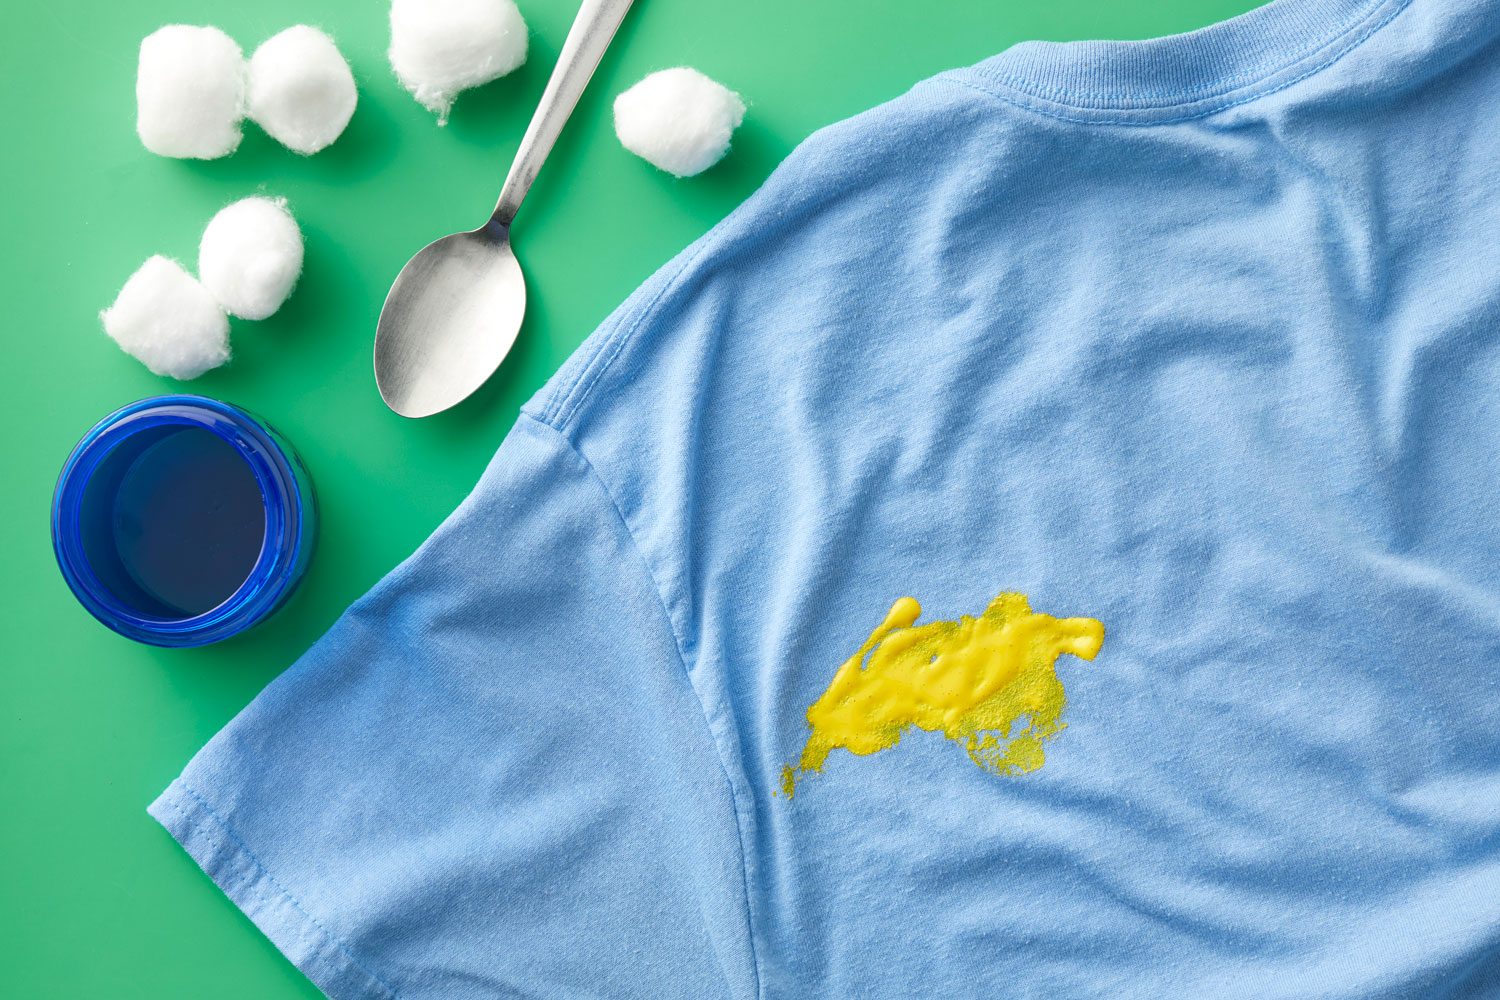 Yellow acrylic, water-based paint stain on a blue t-shirt on green background with supplies needed to clean it nearby